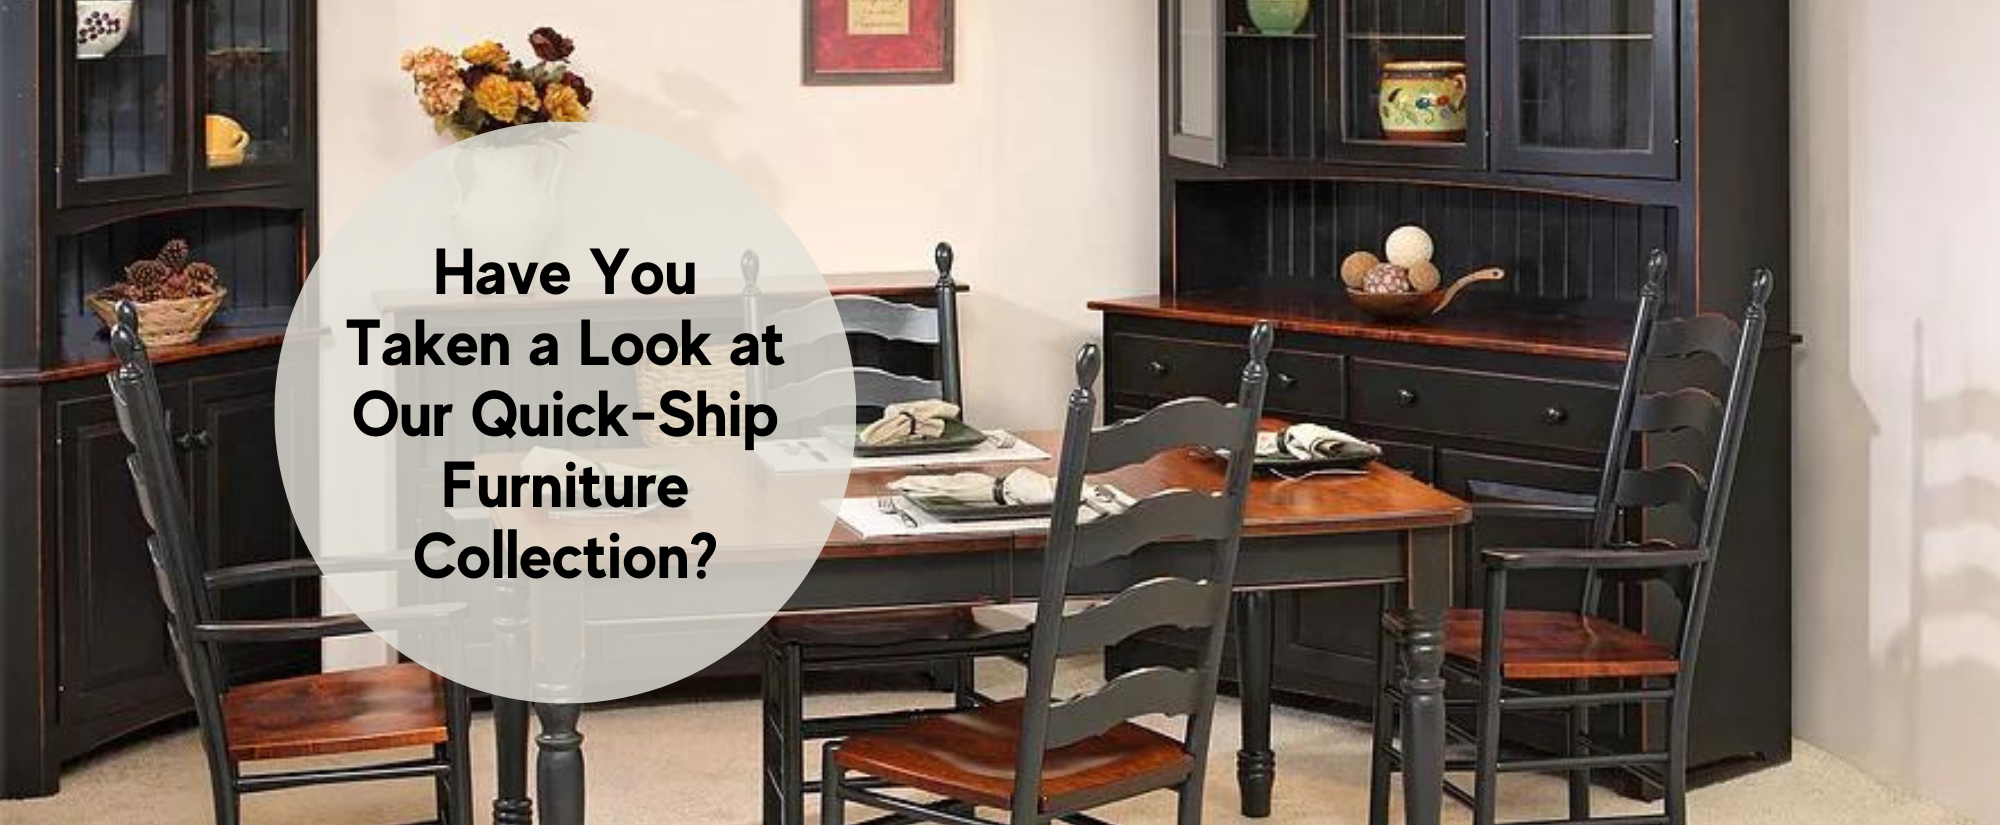 Don't Have Time to Wait? Shop Our Quick-Ship Furniture Collection!